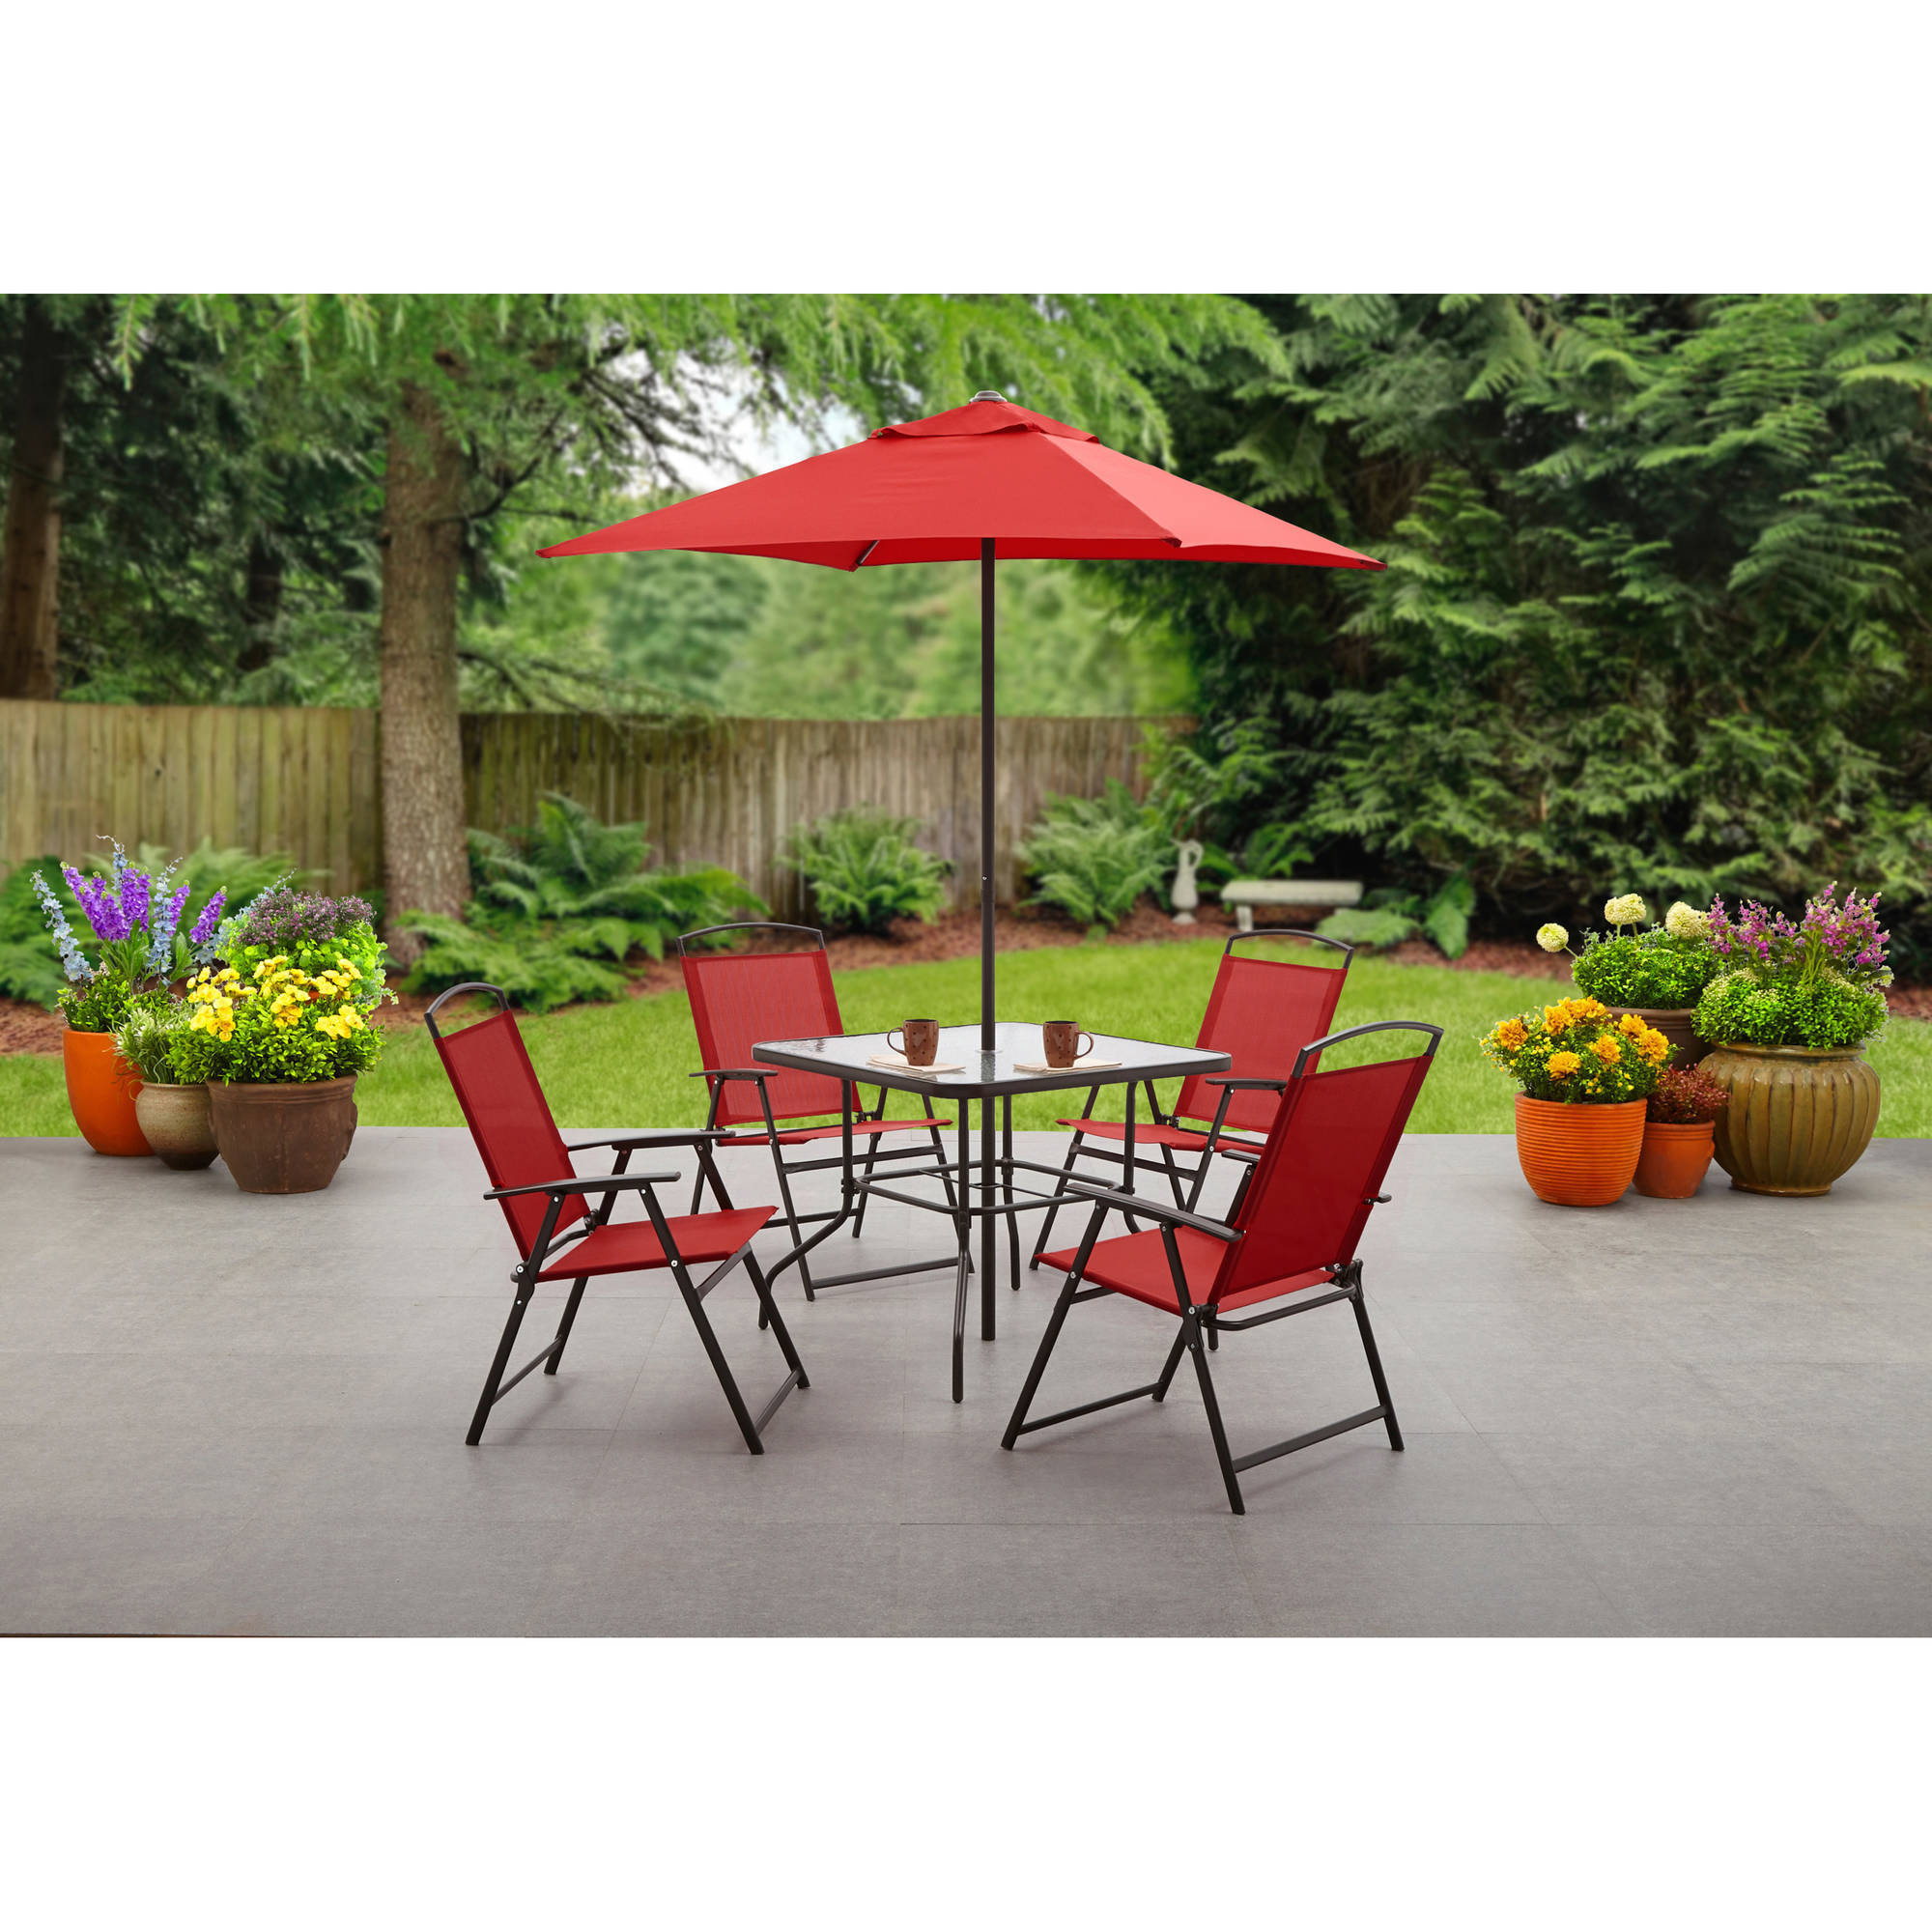 Mainstays Albany Lane 6 Piece Outdoor Patio Dining Set Multiple Colors Walmart within proportions 2000 X 2000